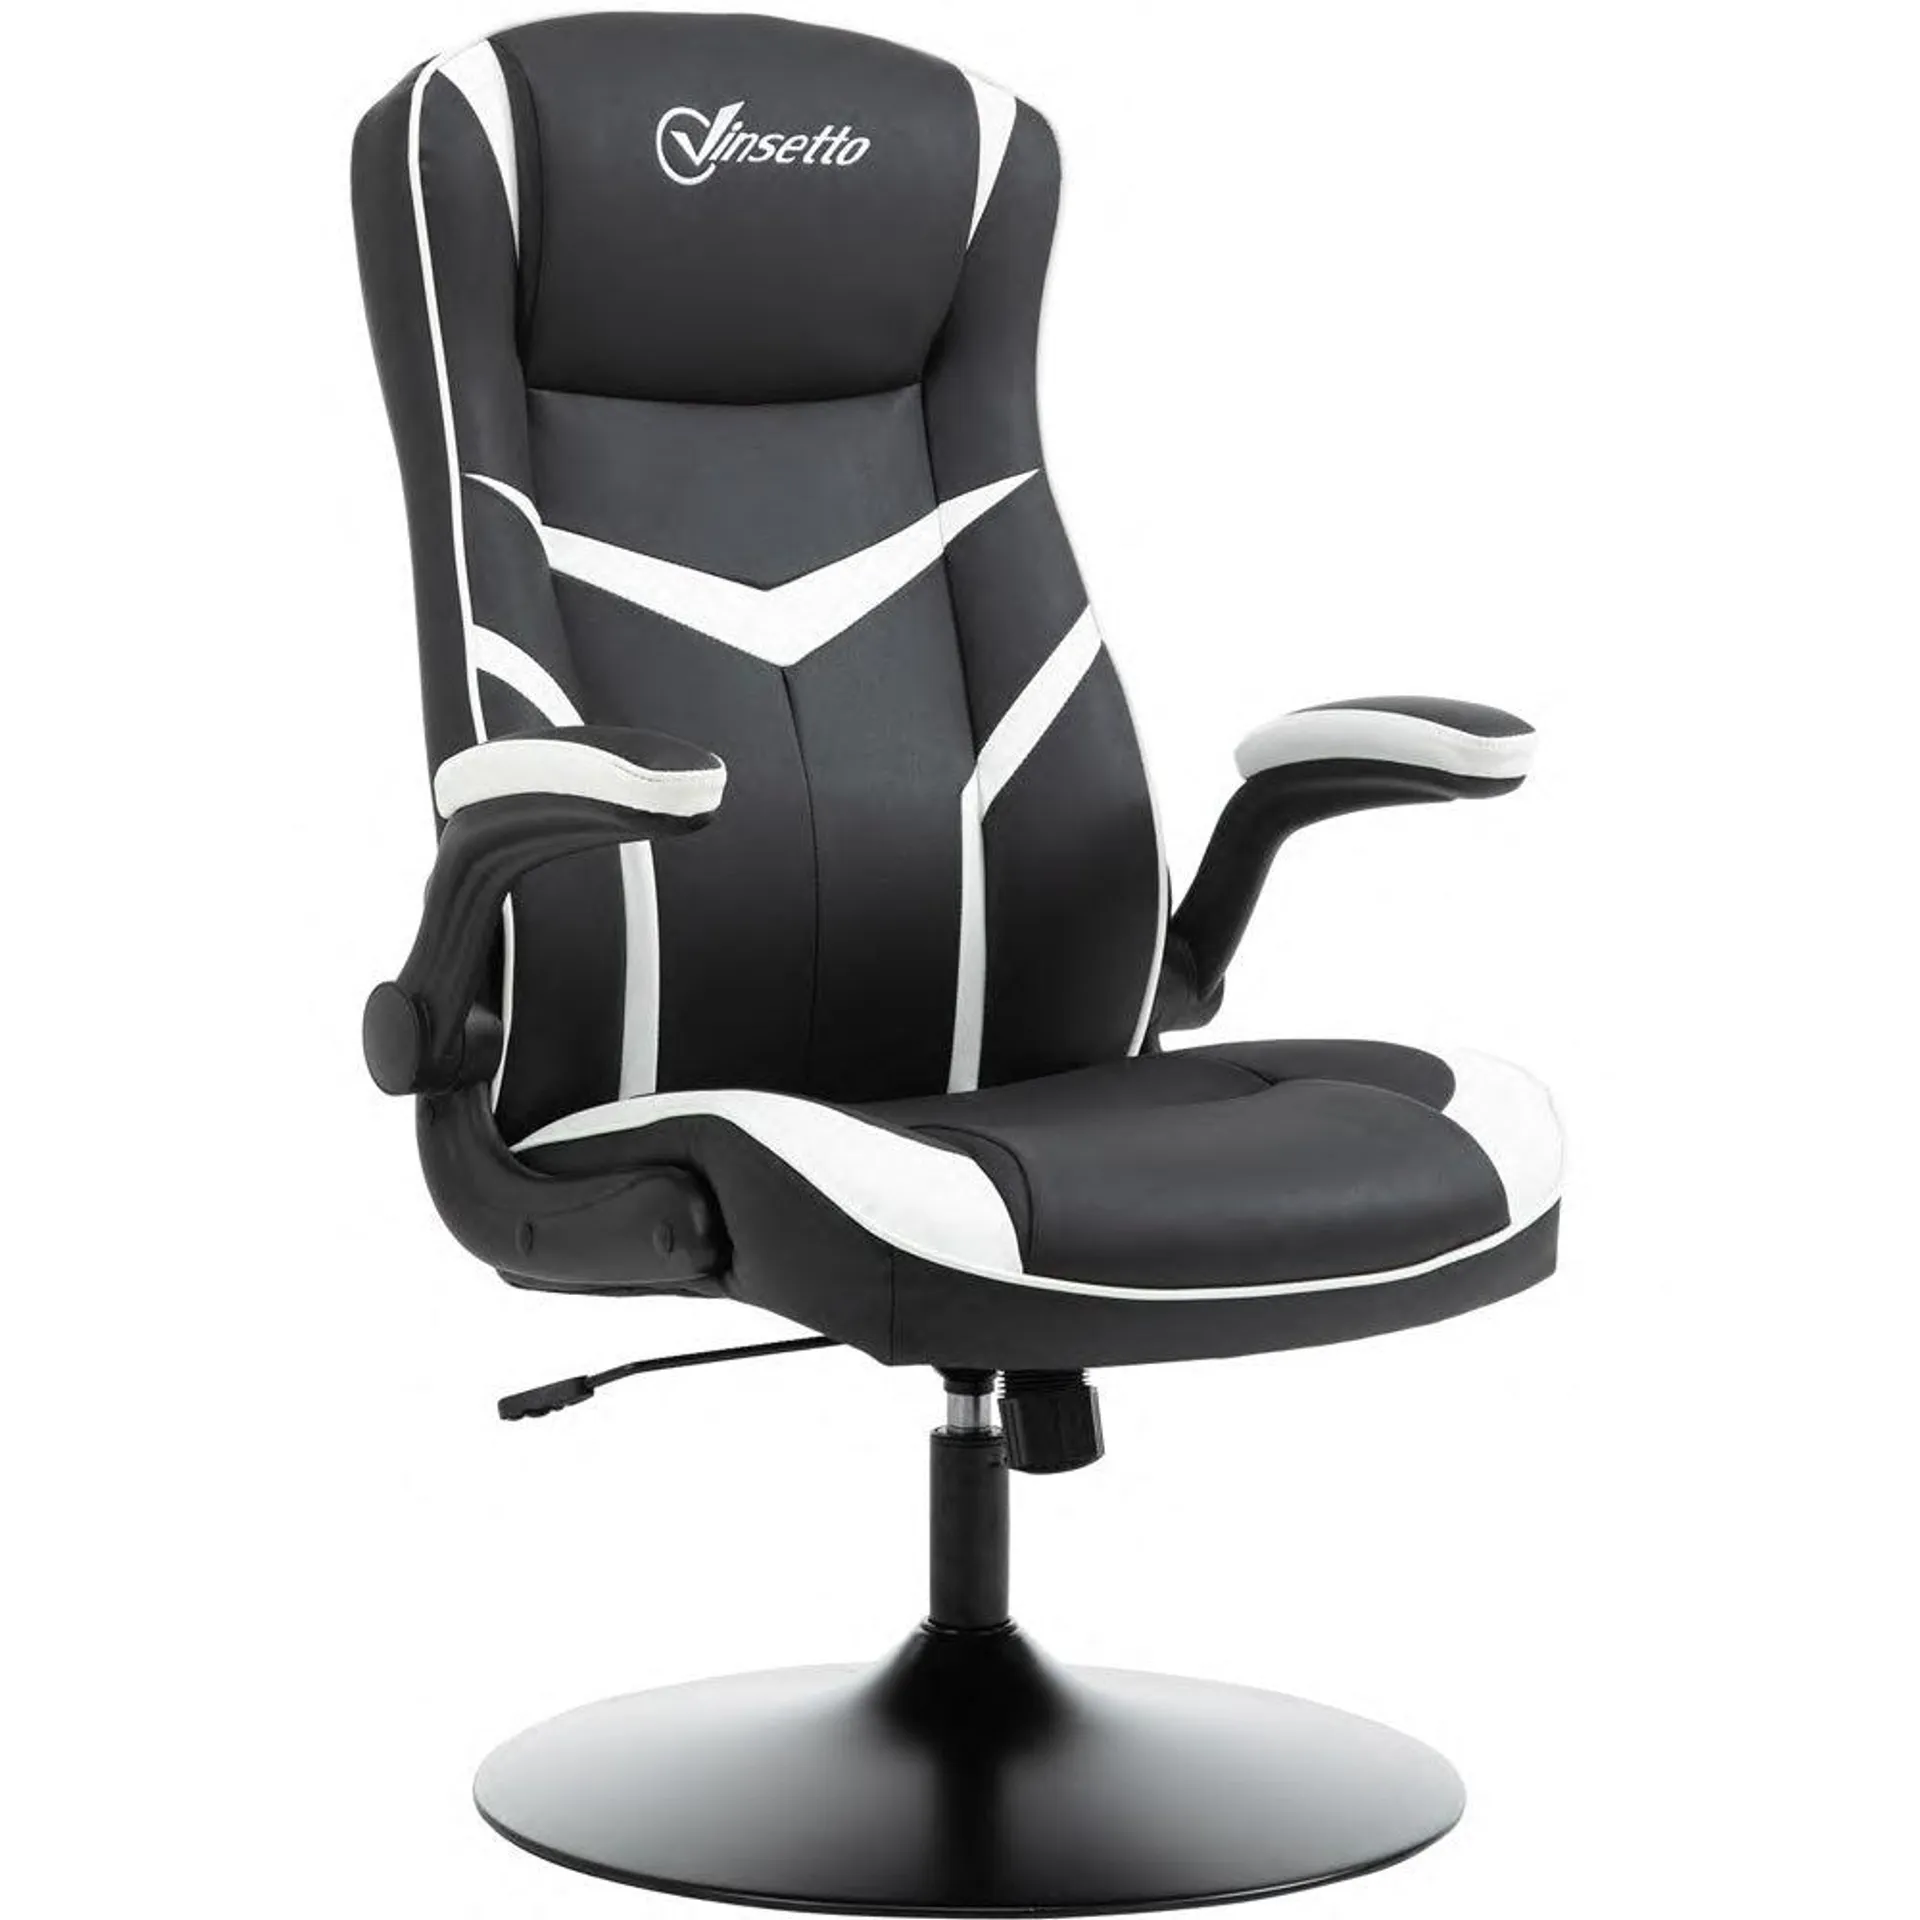 Maplin Plus Faux Leather Ergonomic Adjustable Gaming Chair with Pedestal Base